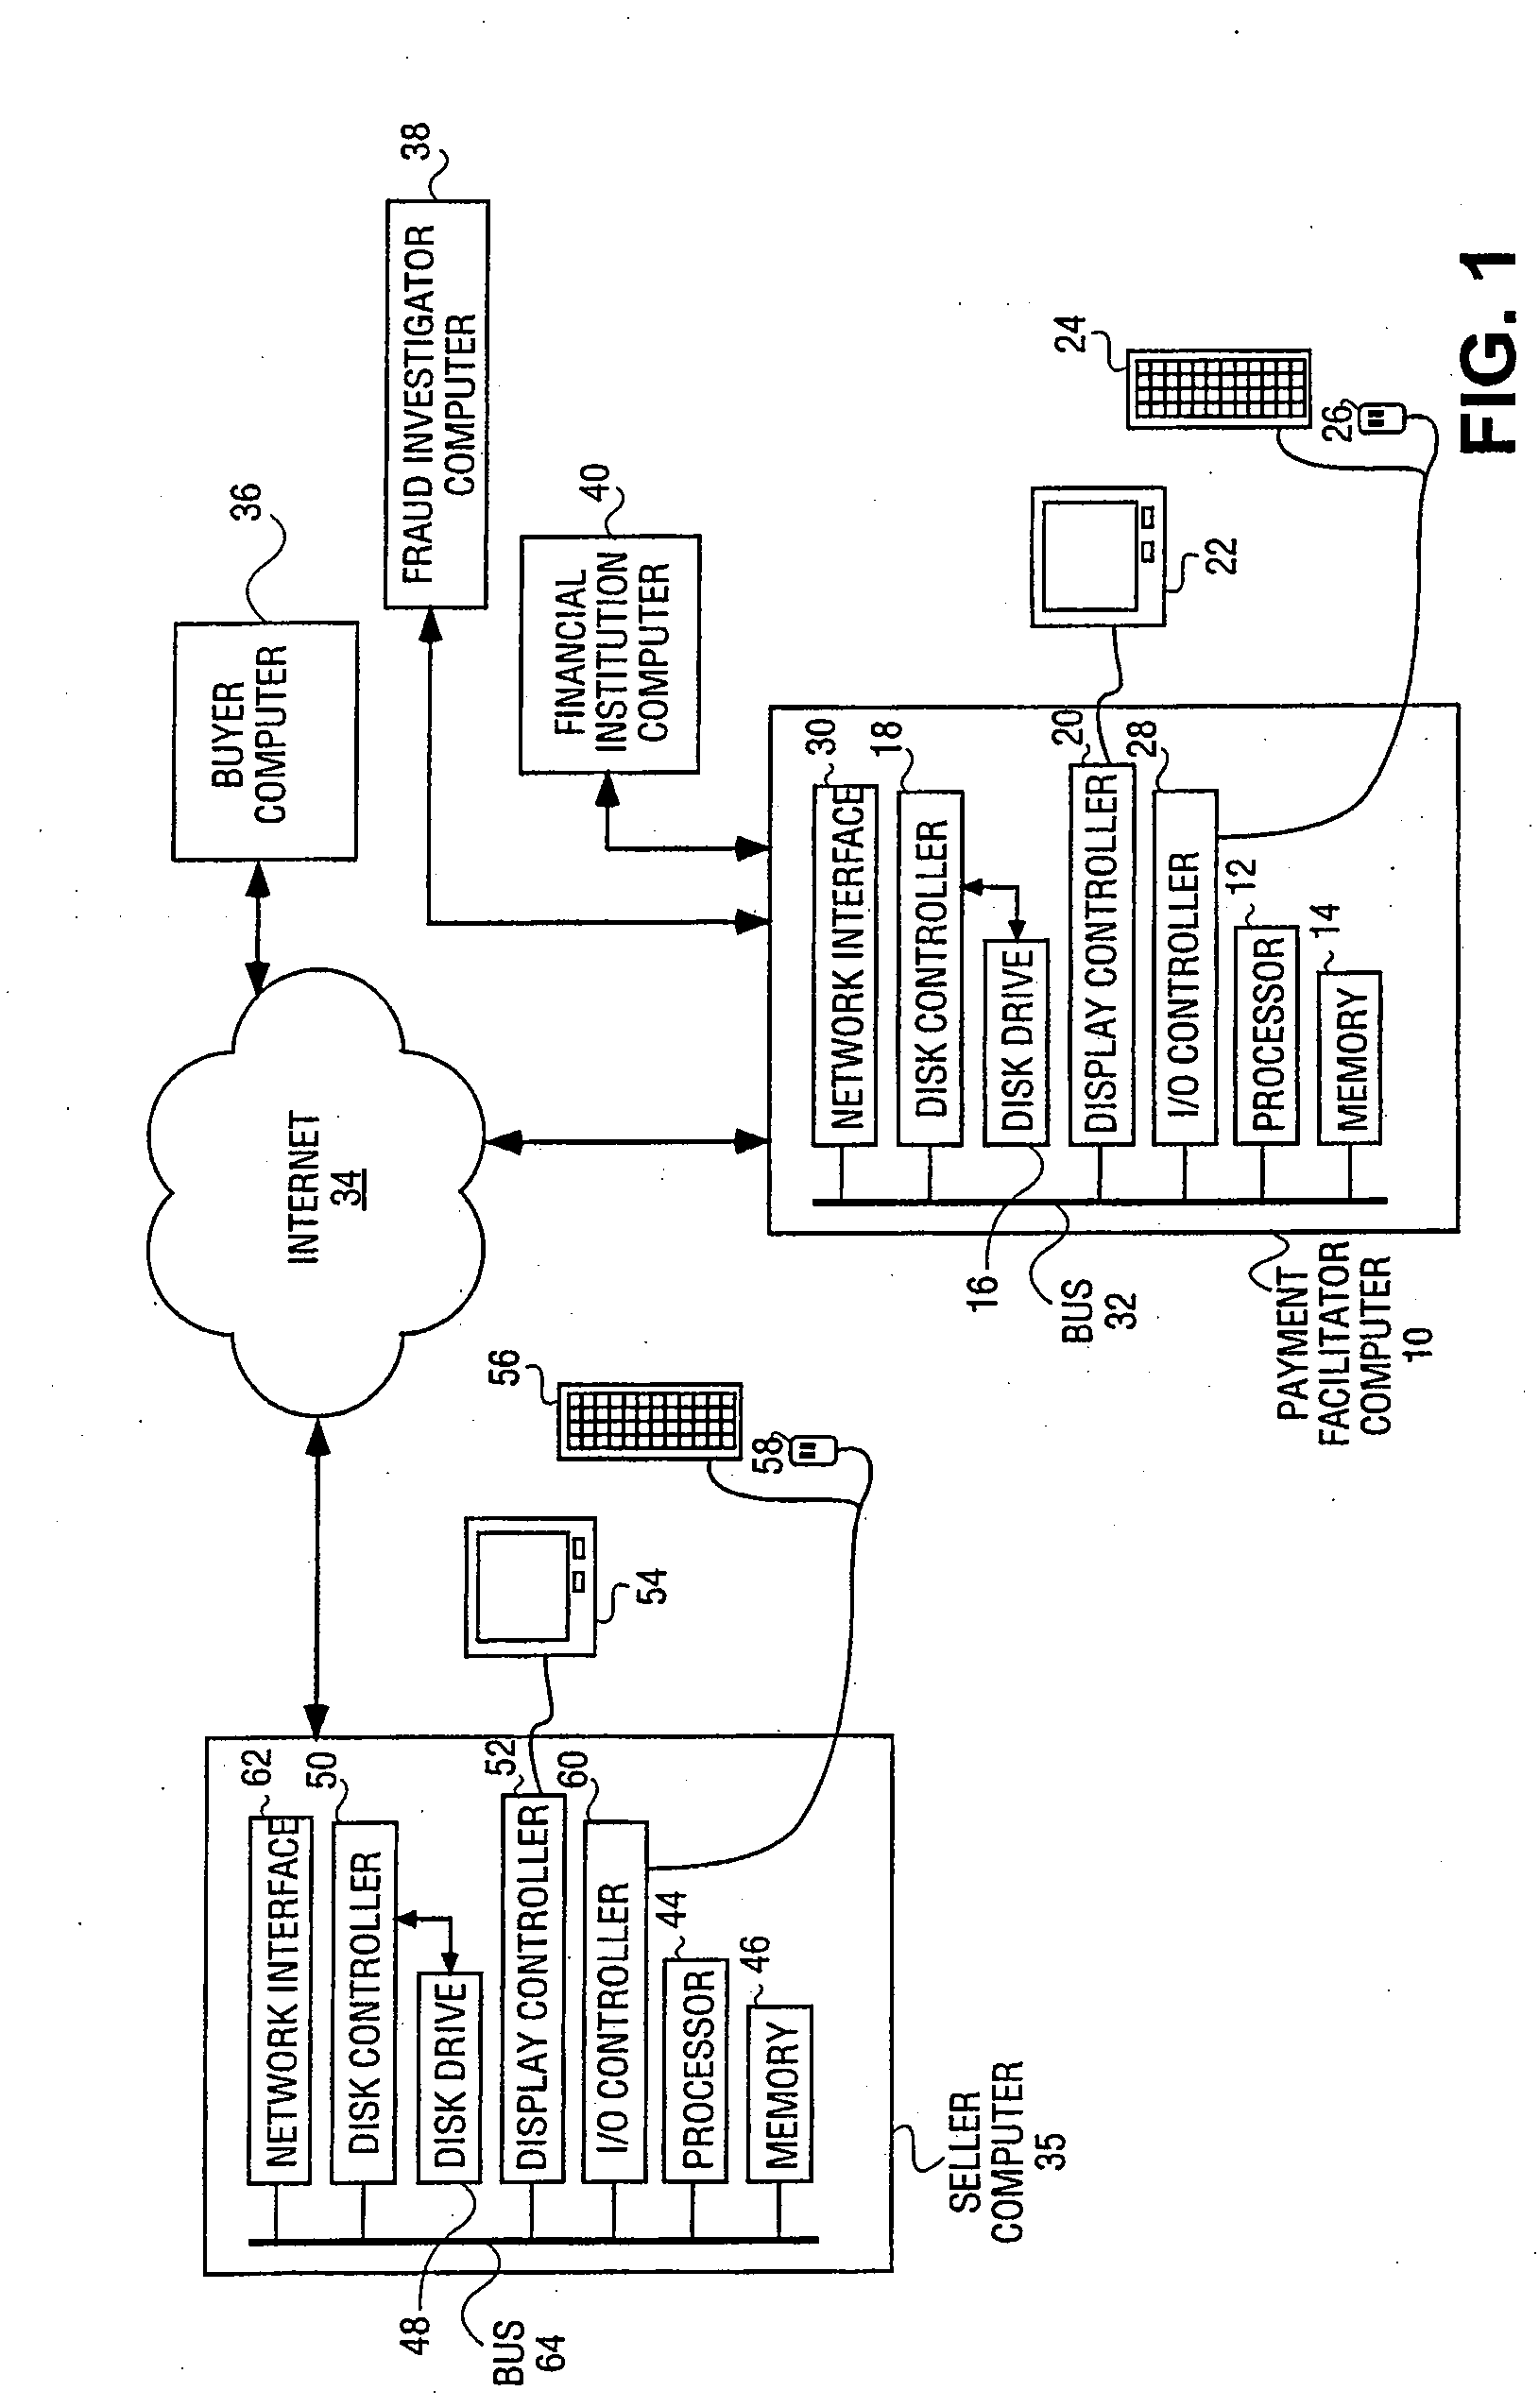 Method and system for detecting fraud